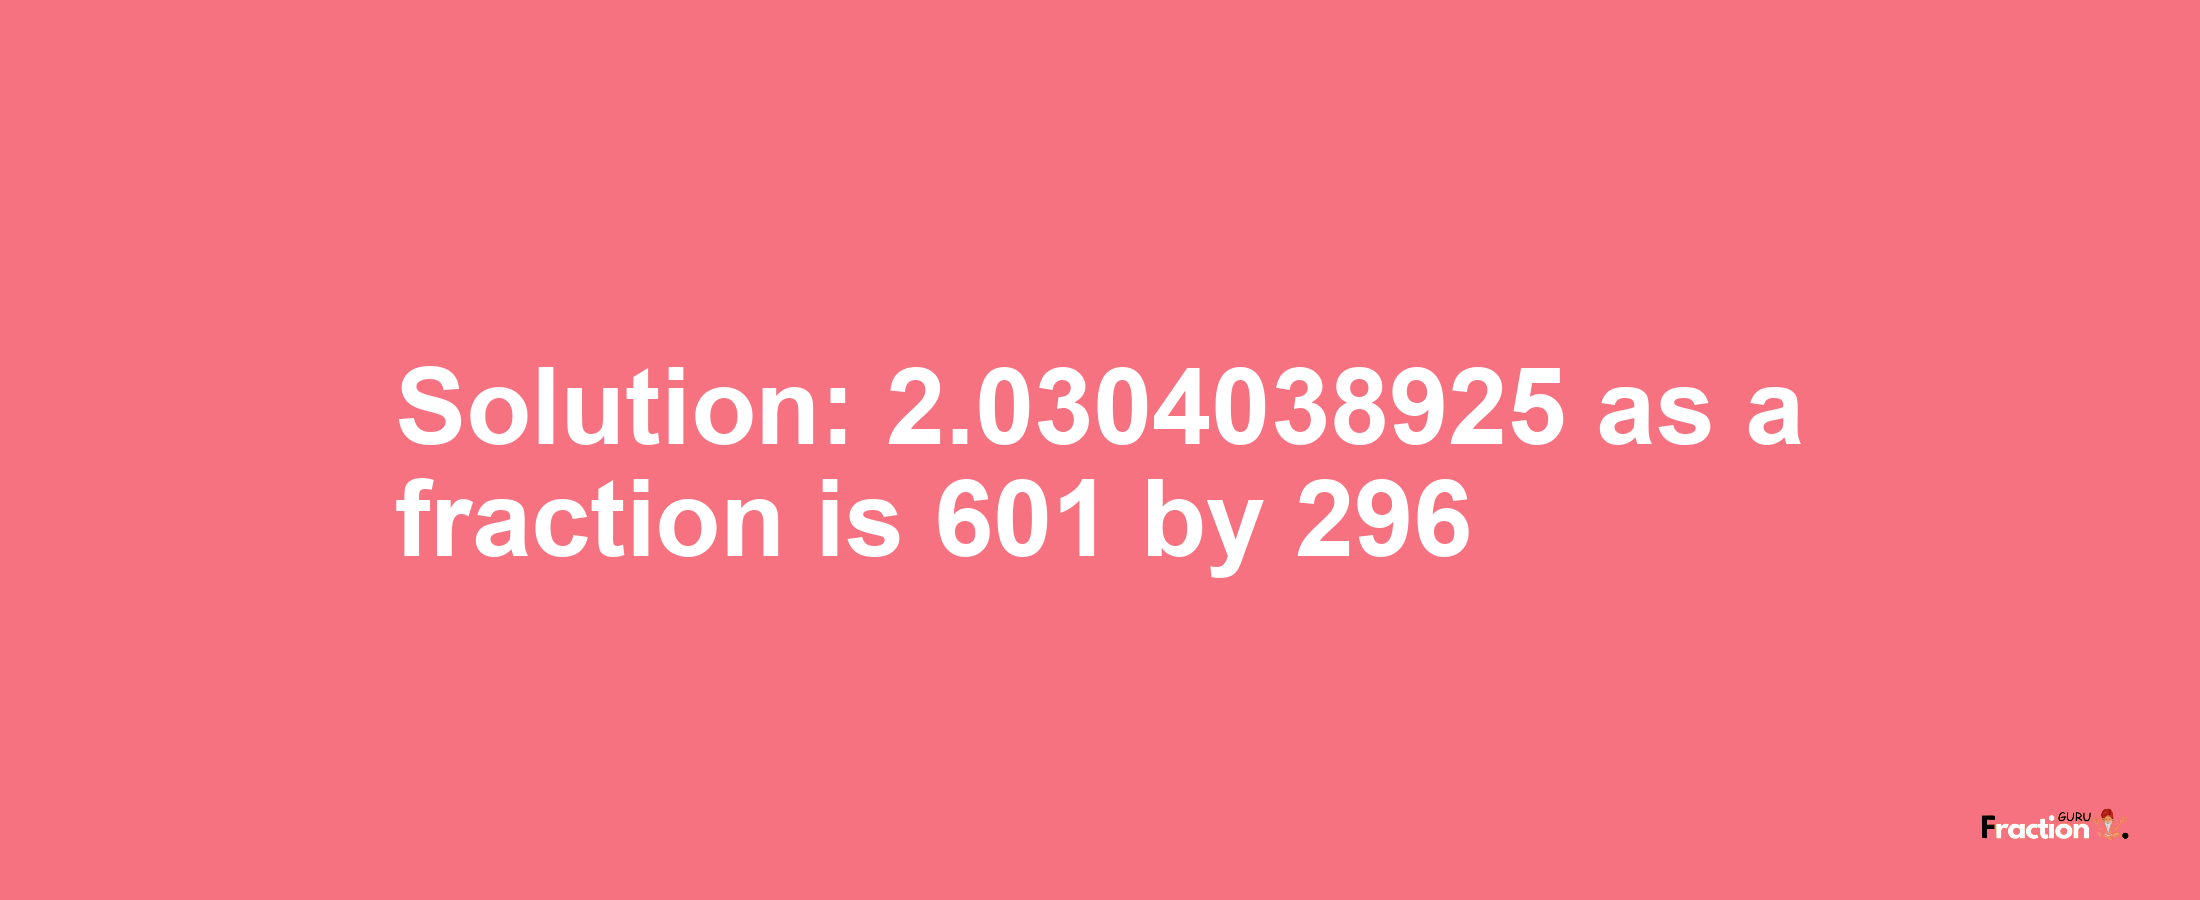 Solution:2.0304038925 as a fraction is 601/296